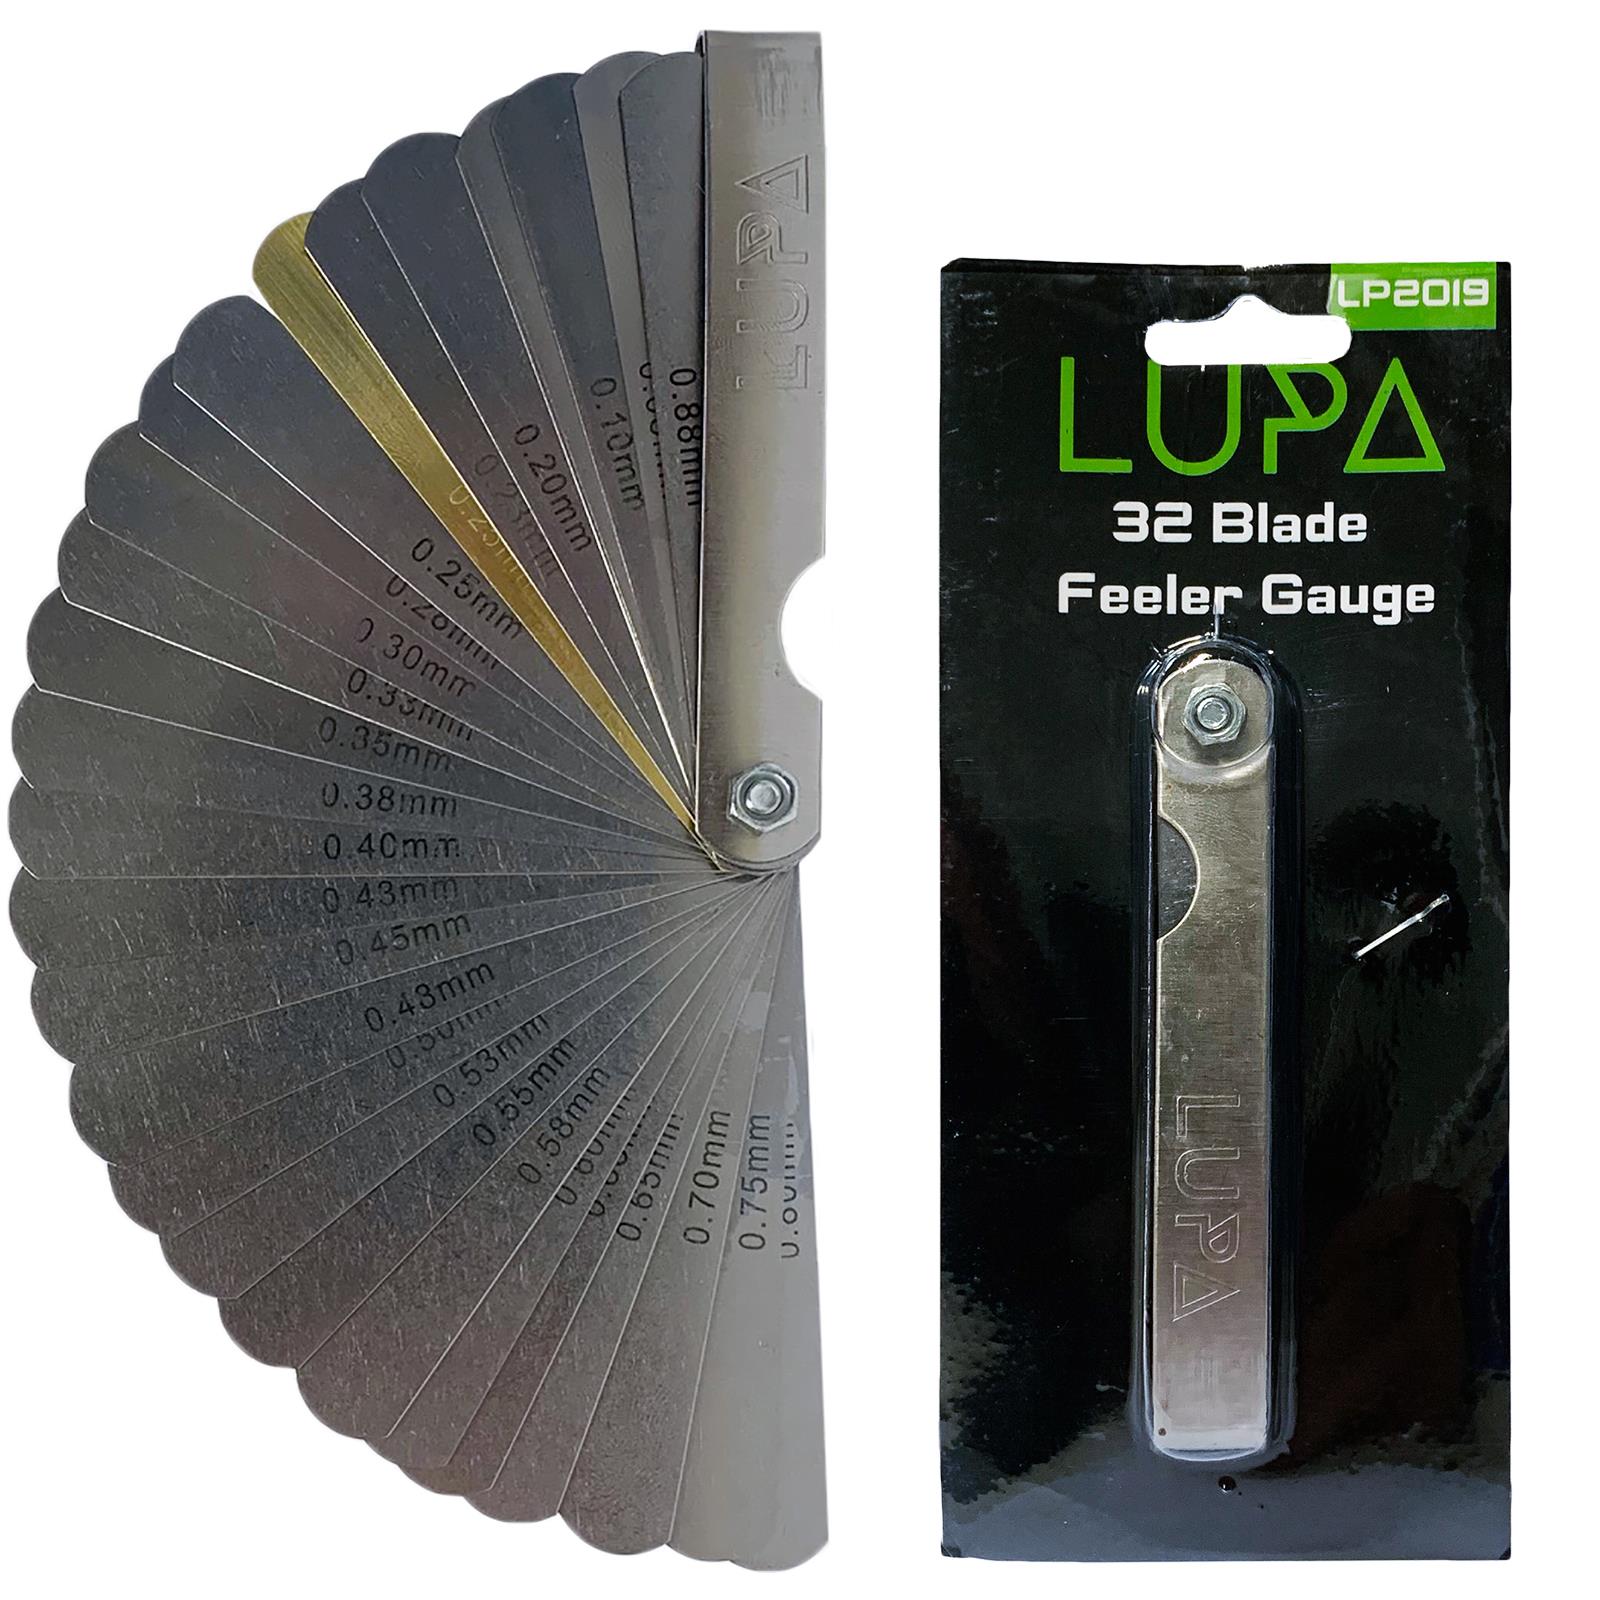 LUPA Feeler Gauge Dual Marked Metric and Imperial 32 Blade